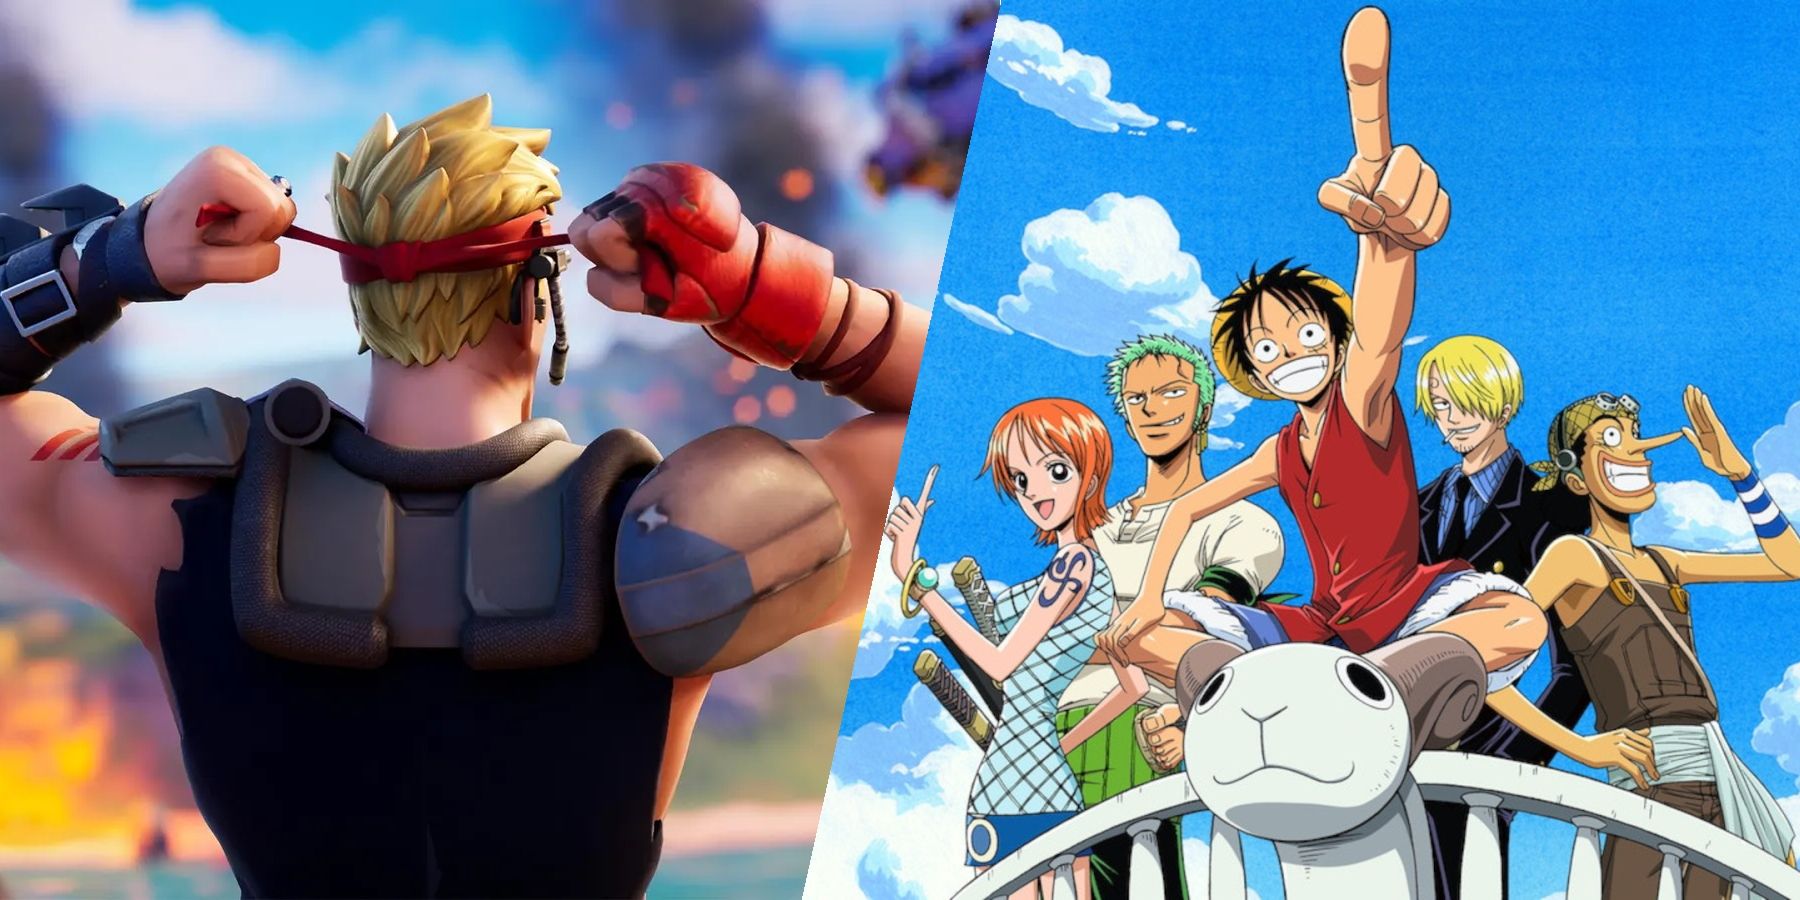 A side-by-side image of promotional art for Epic Games' Fortnite and Toei's One Piece.